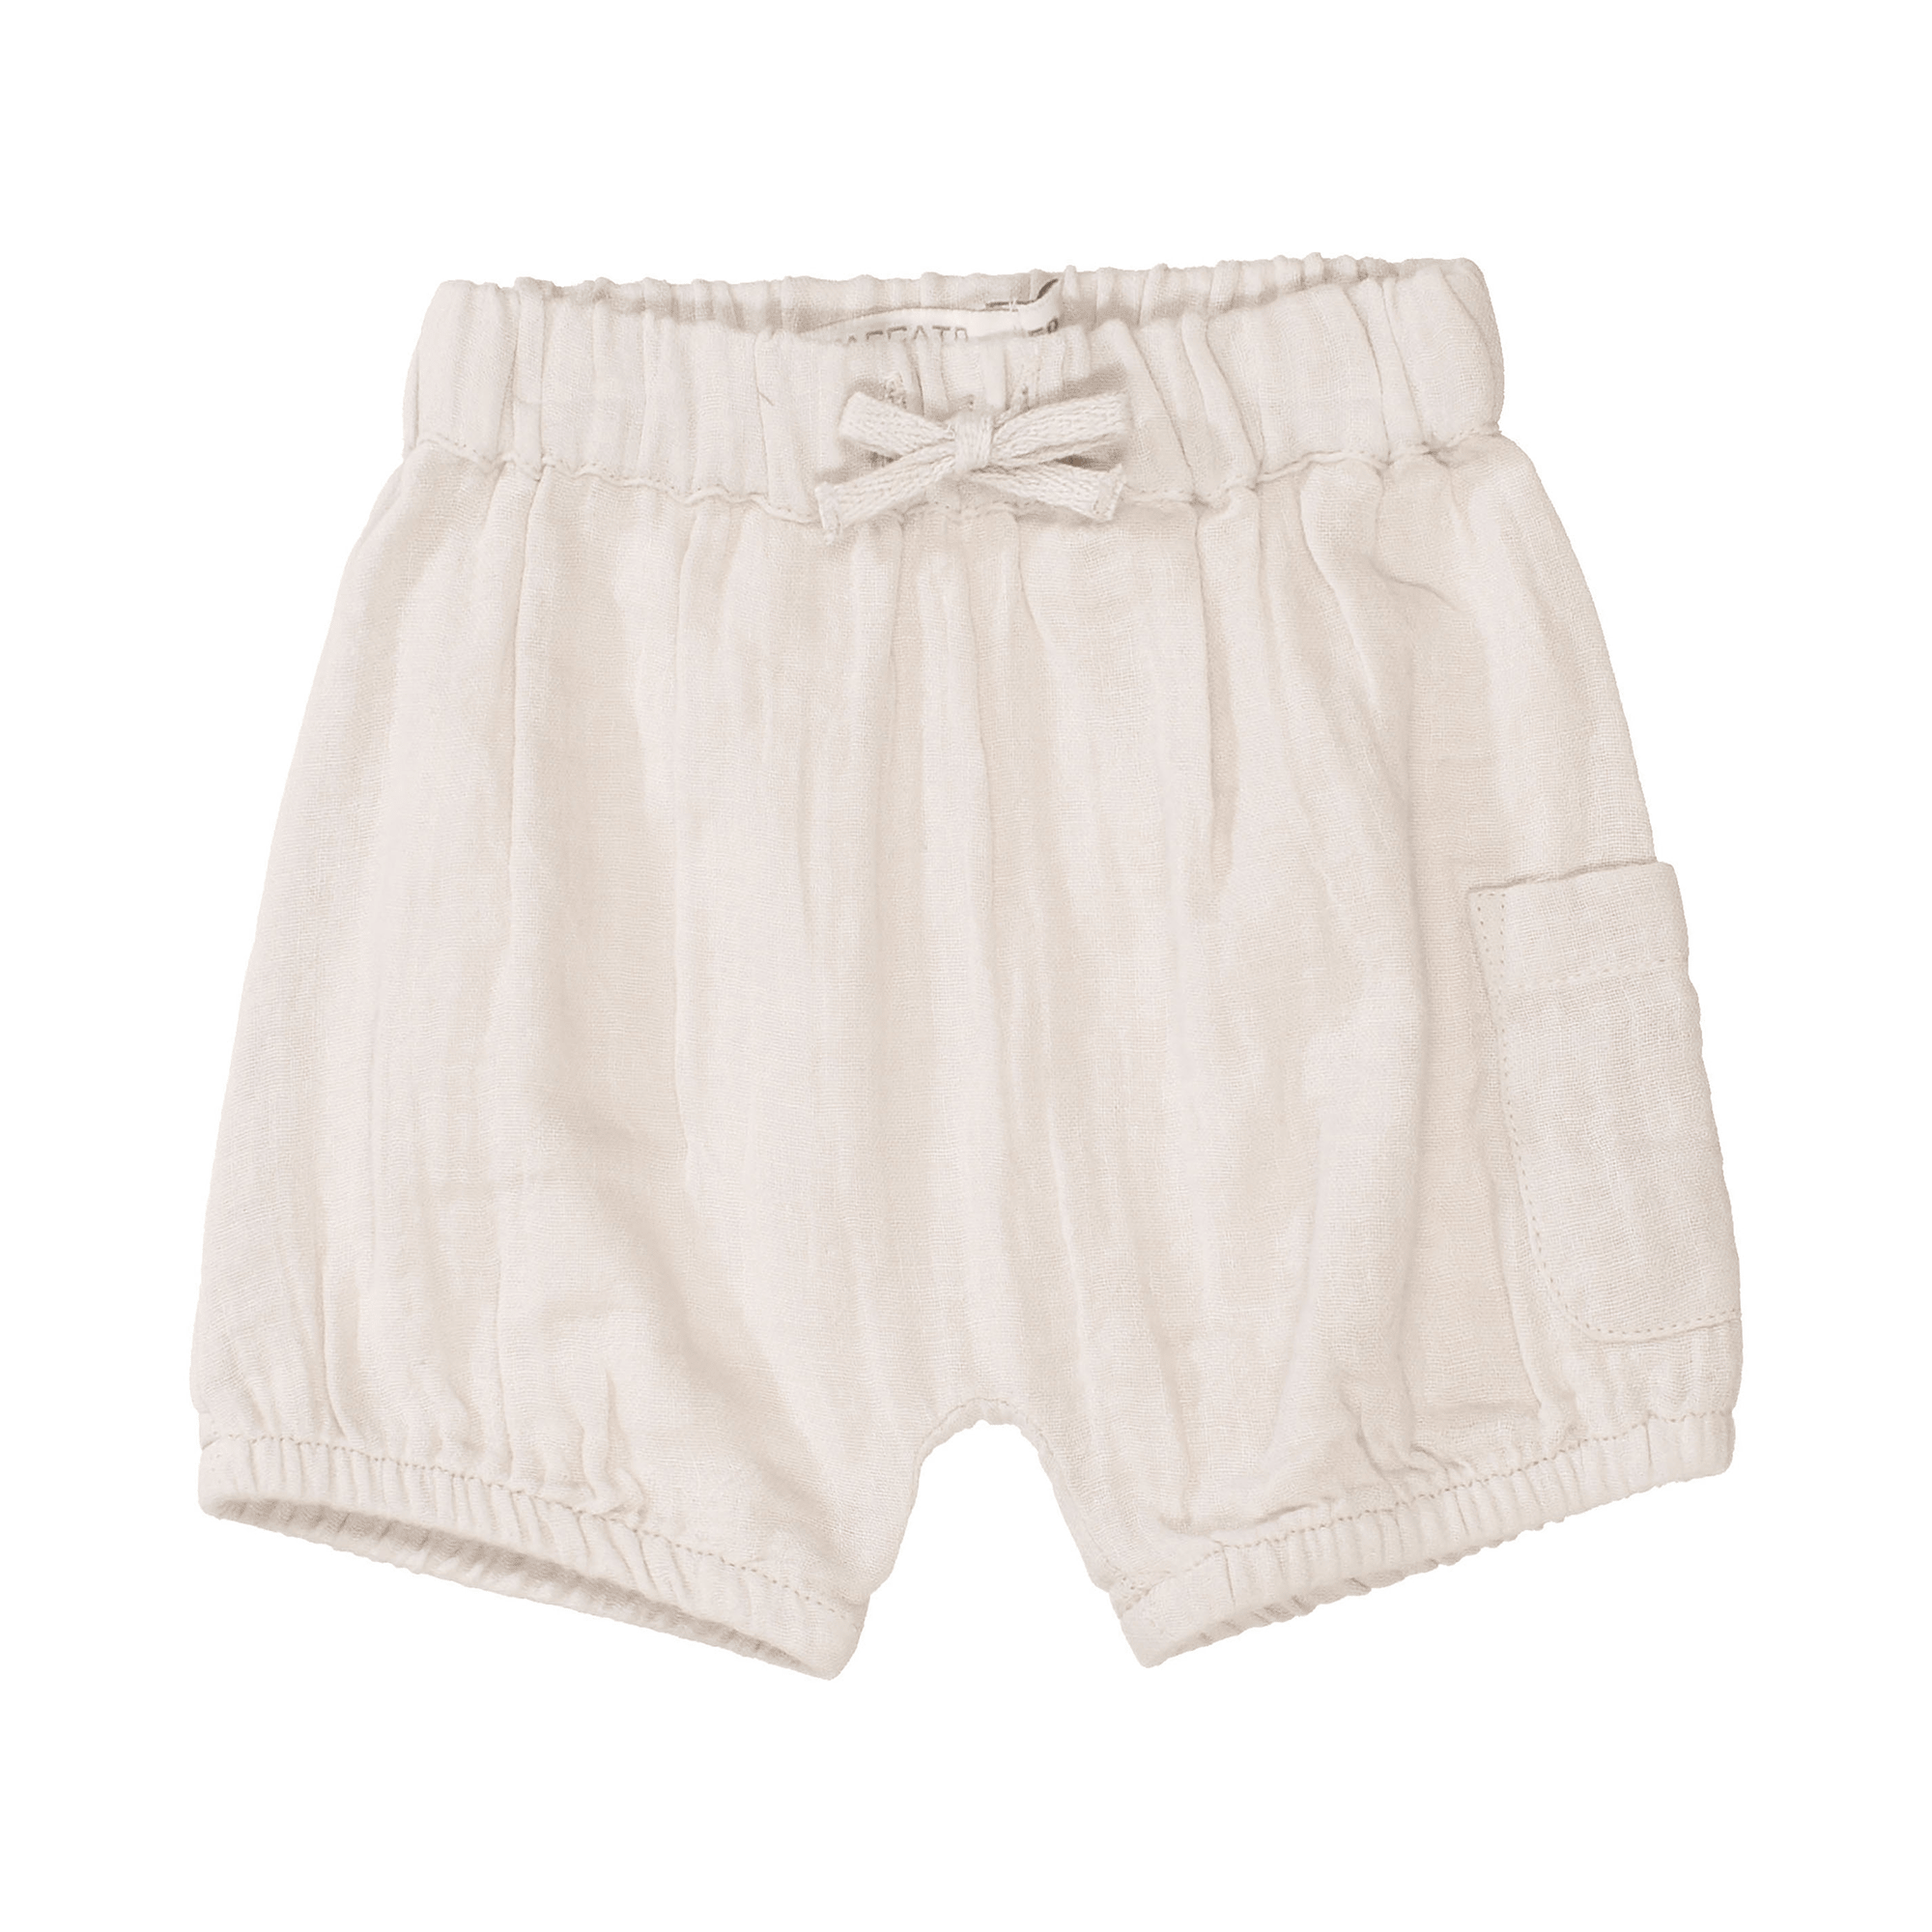 Shorts April STACCATO Beige M2000585956400 1